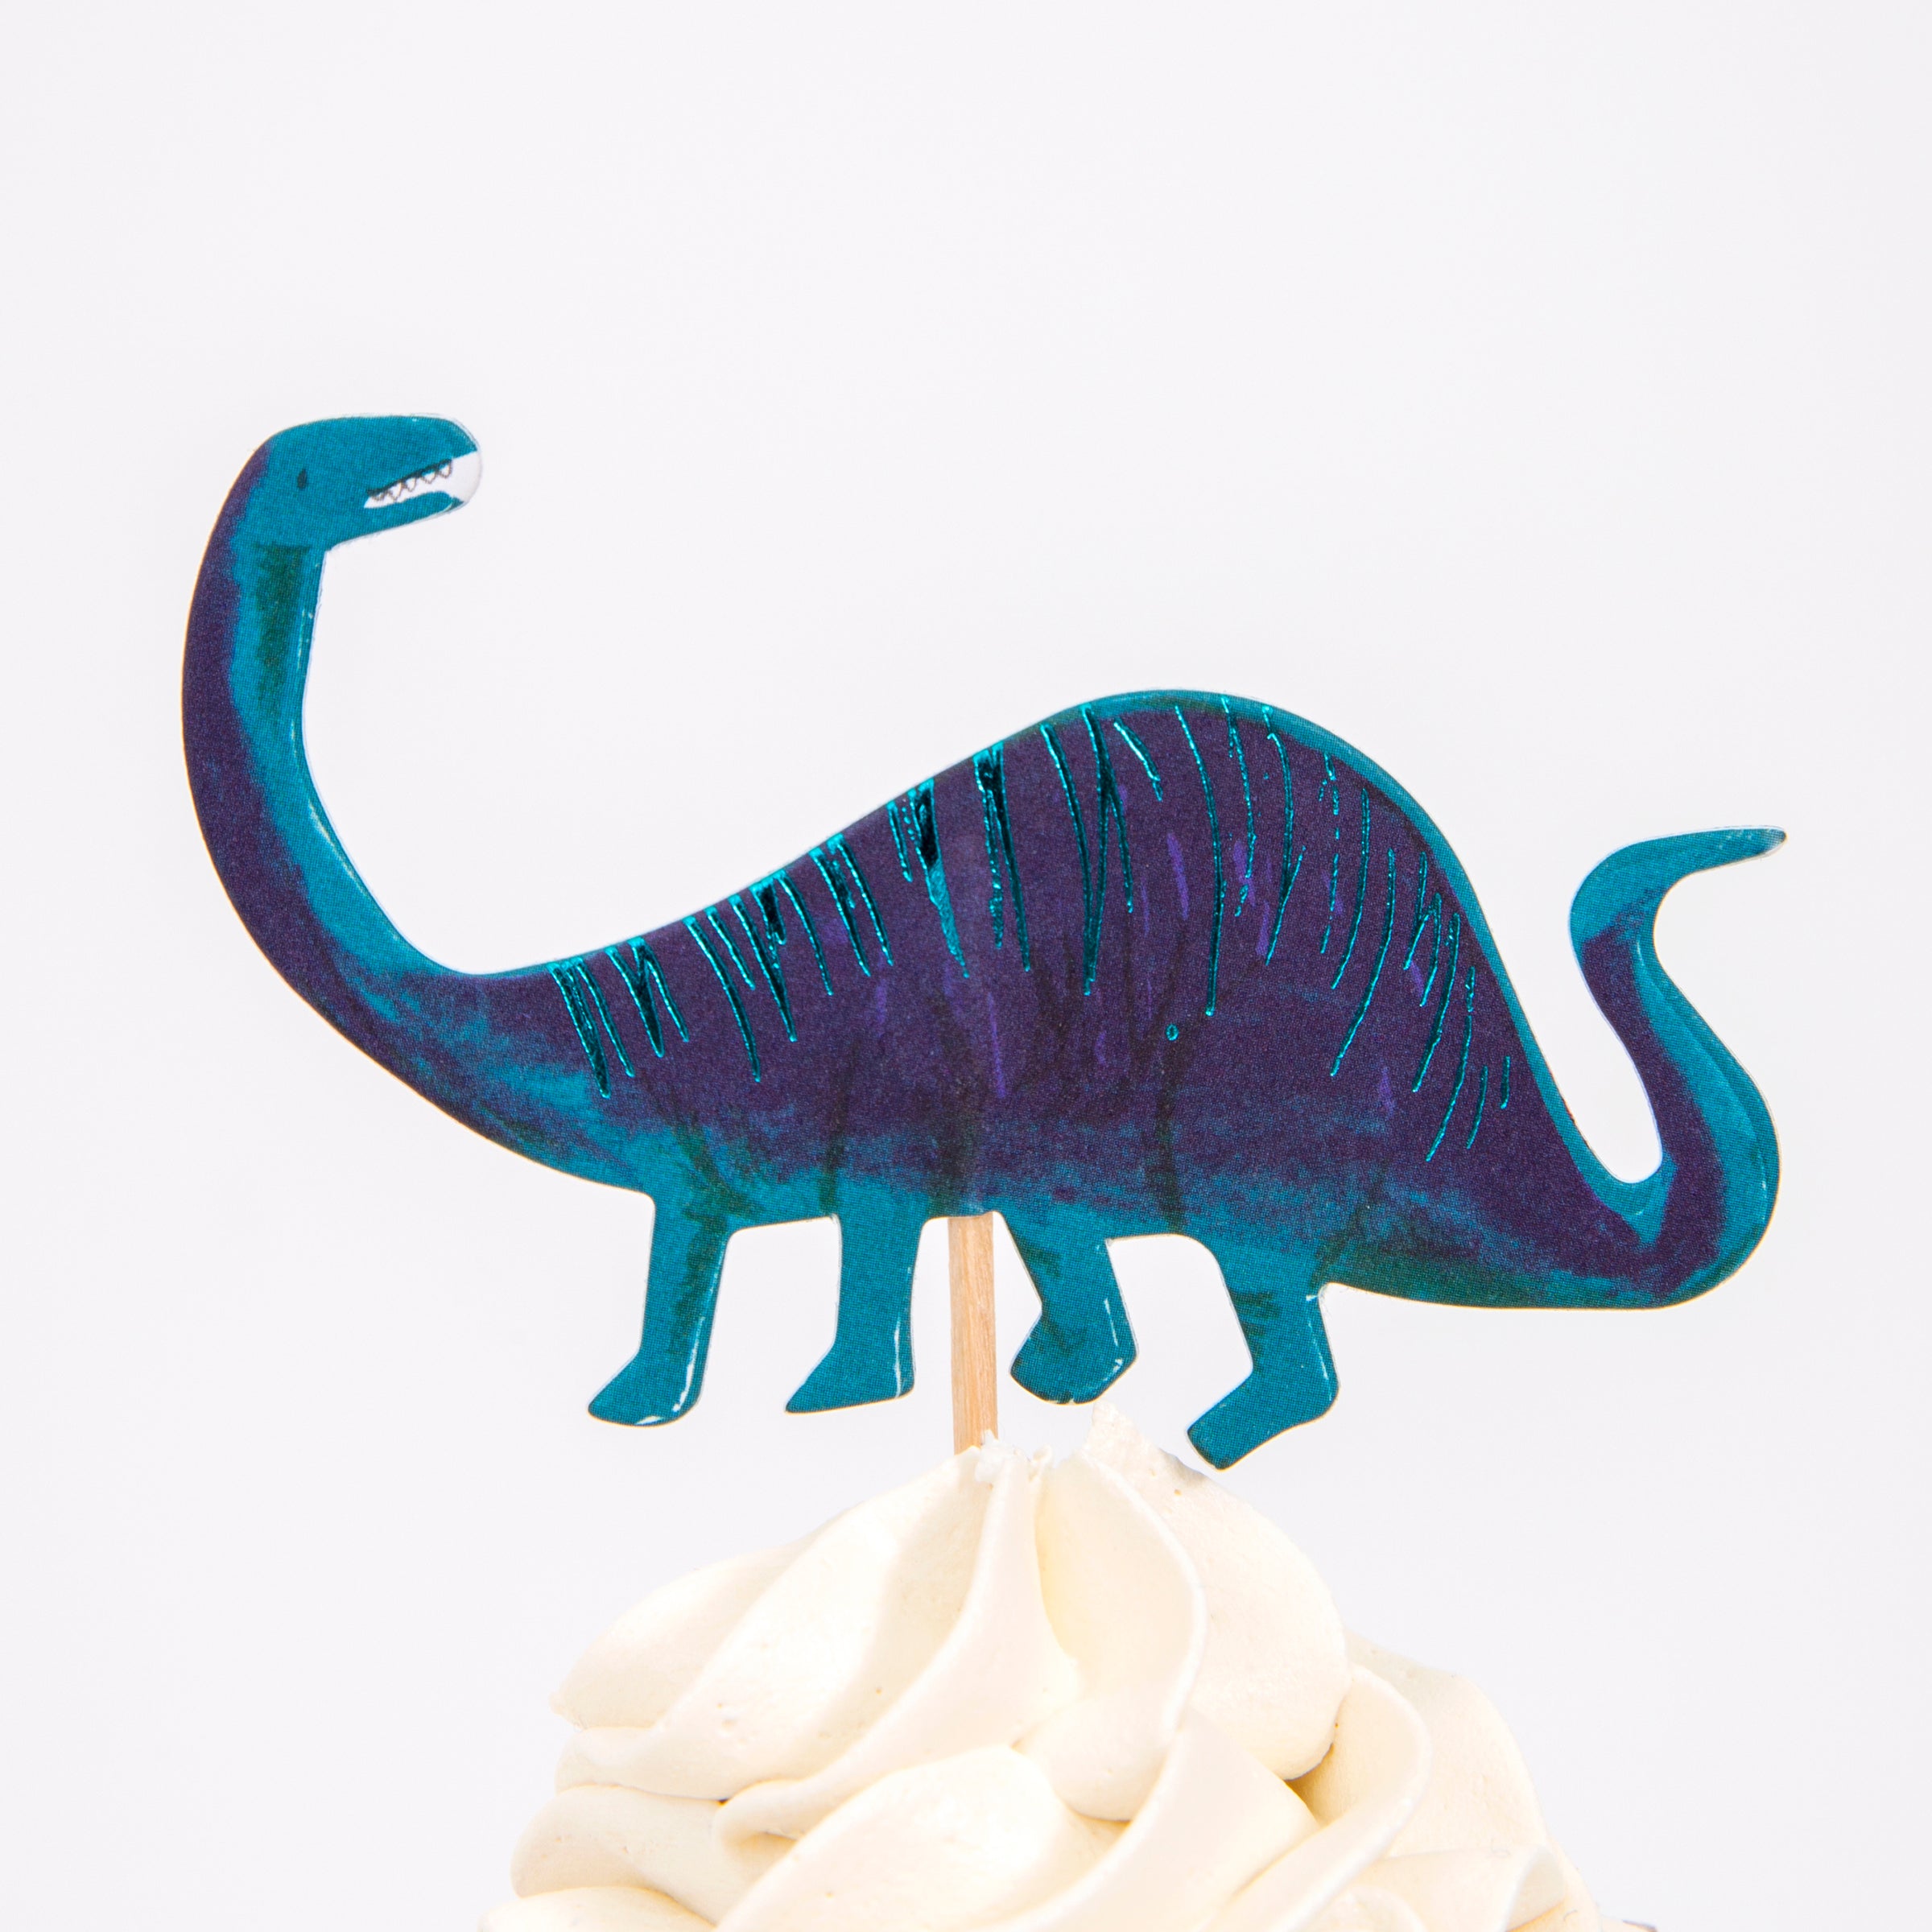 Make dinosaur cupcakes for your dinosaur party with our special dinosaur cake toppers and shiny copper foil cupcake cases.